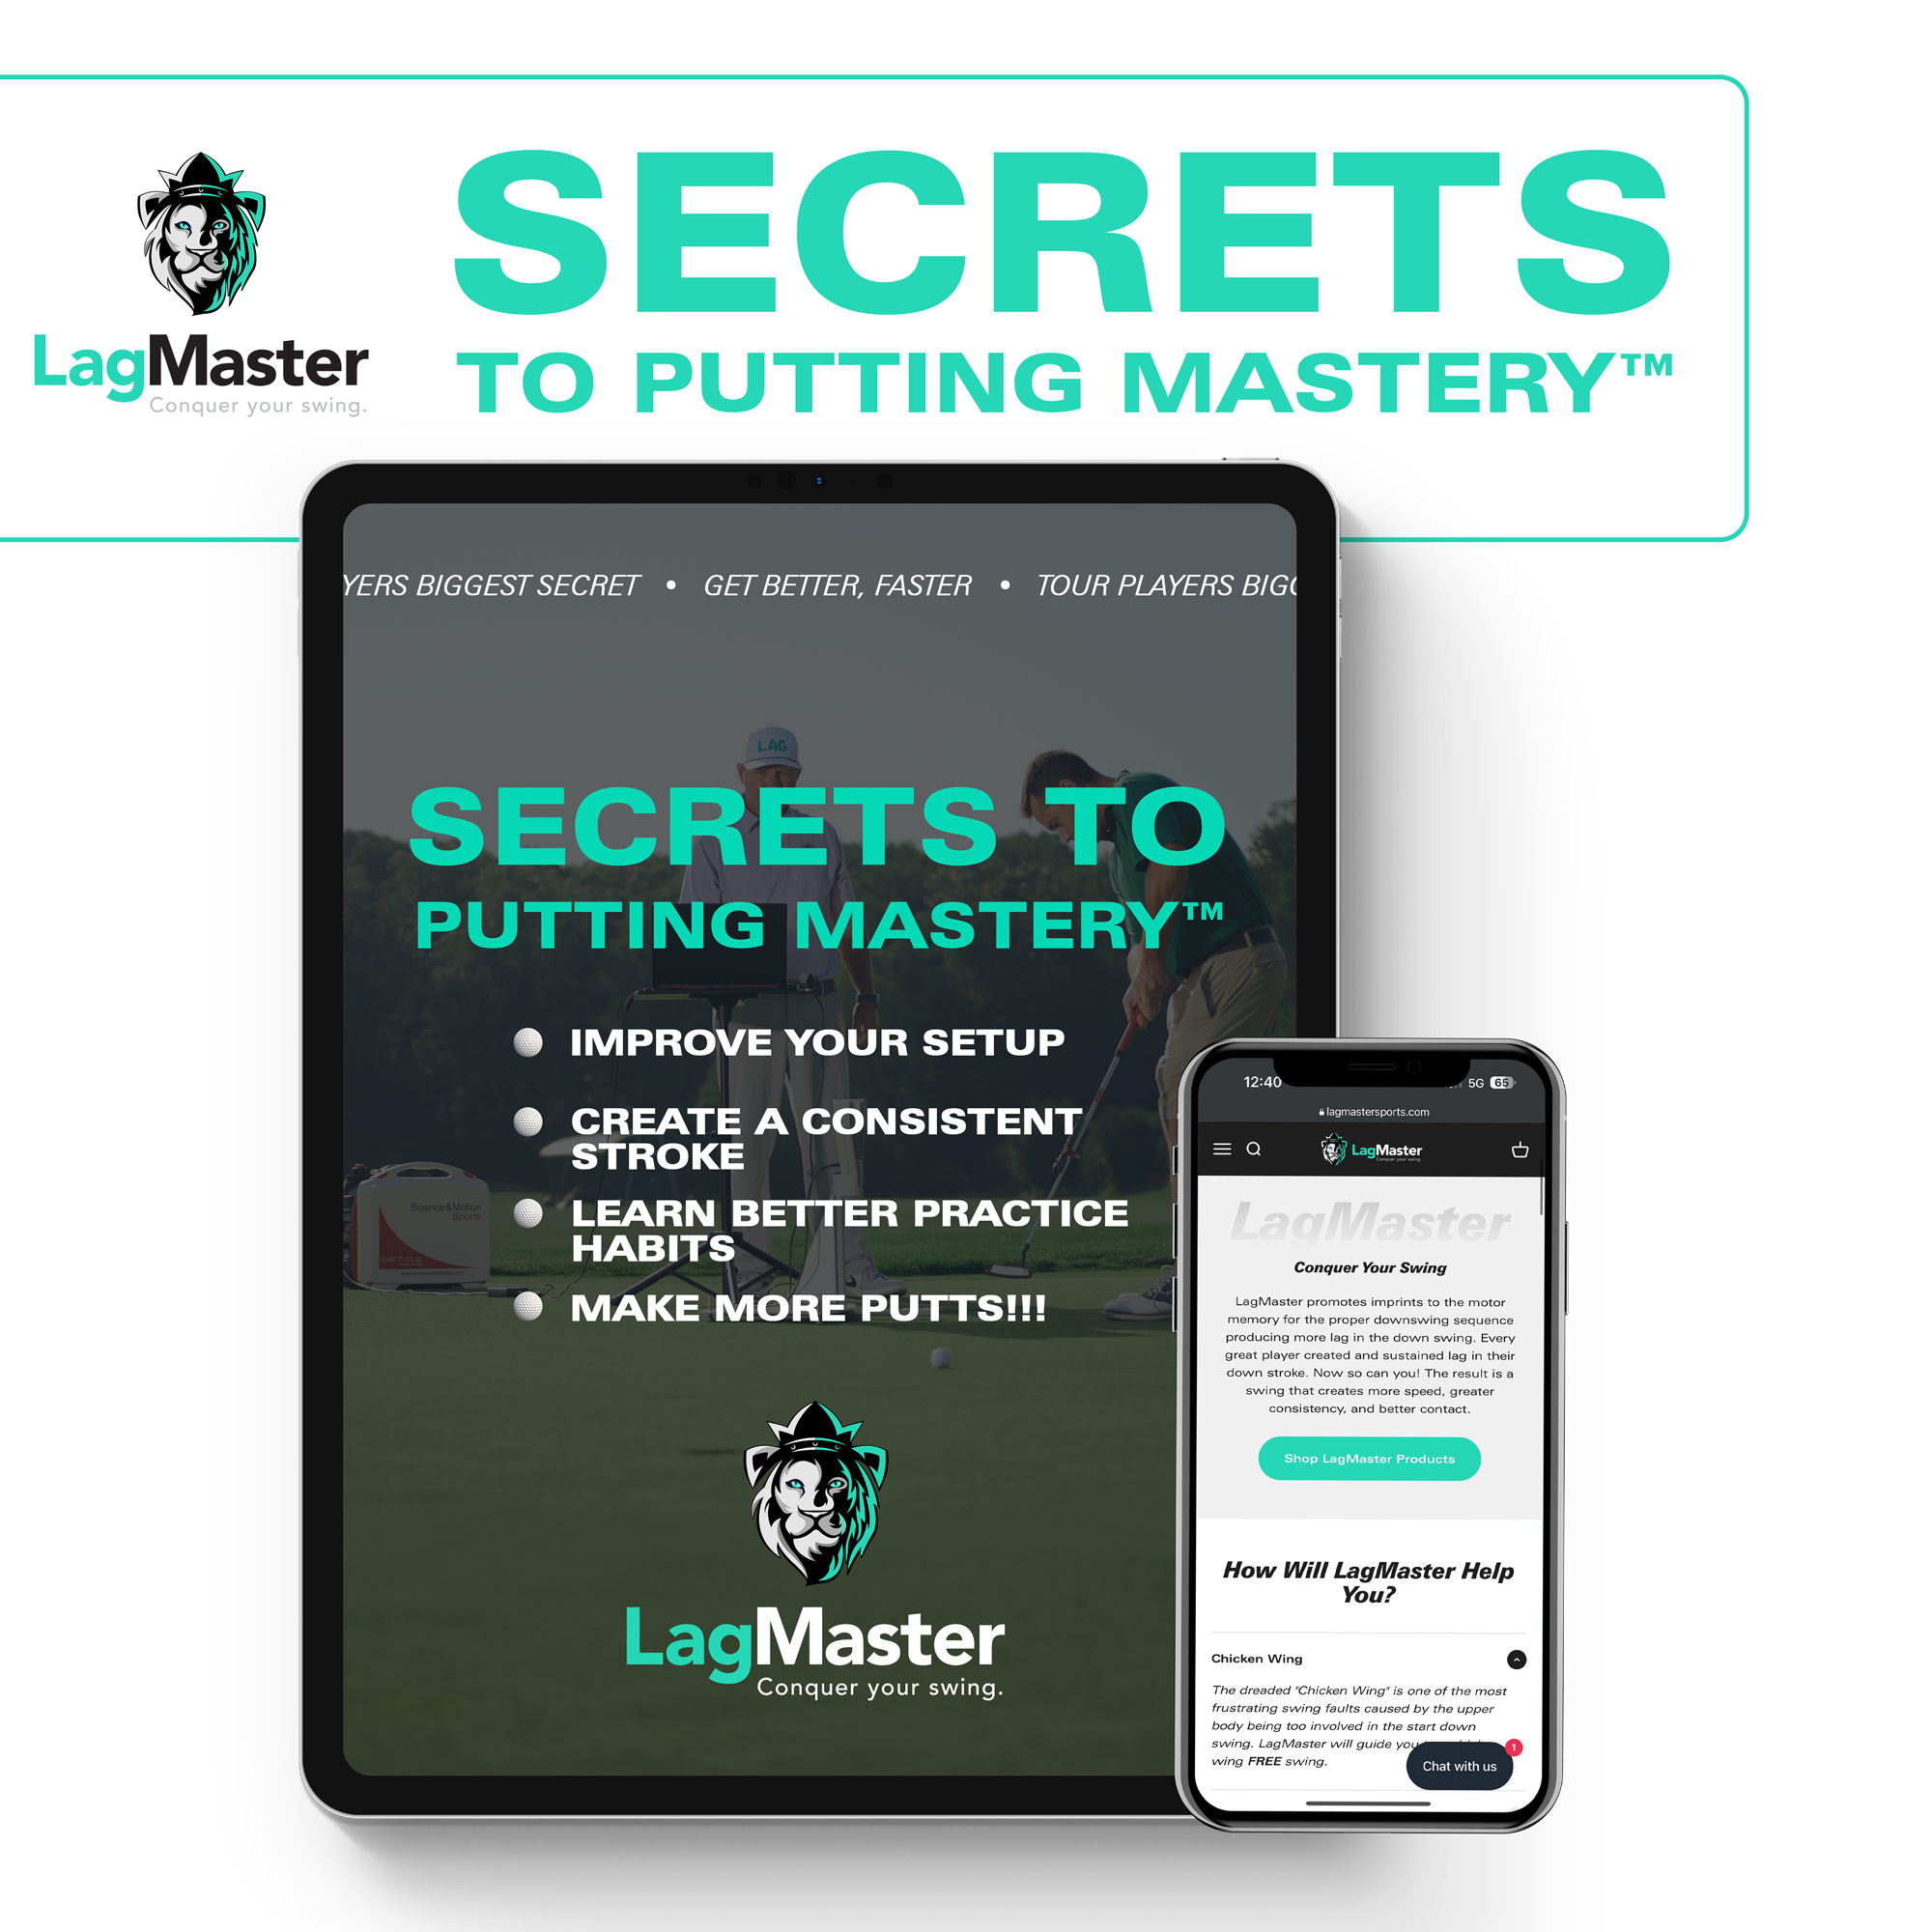 Secrets to Putting Mastery™